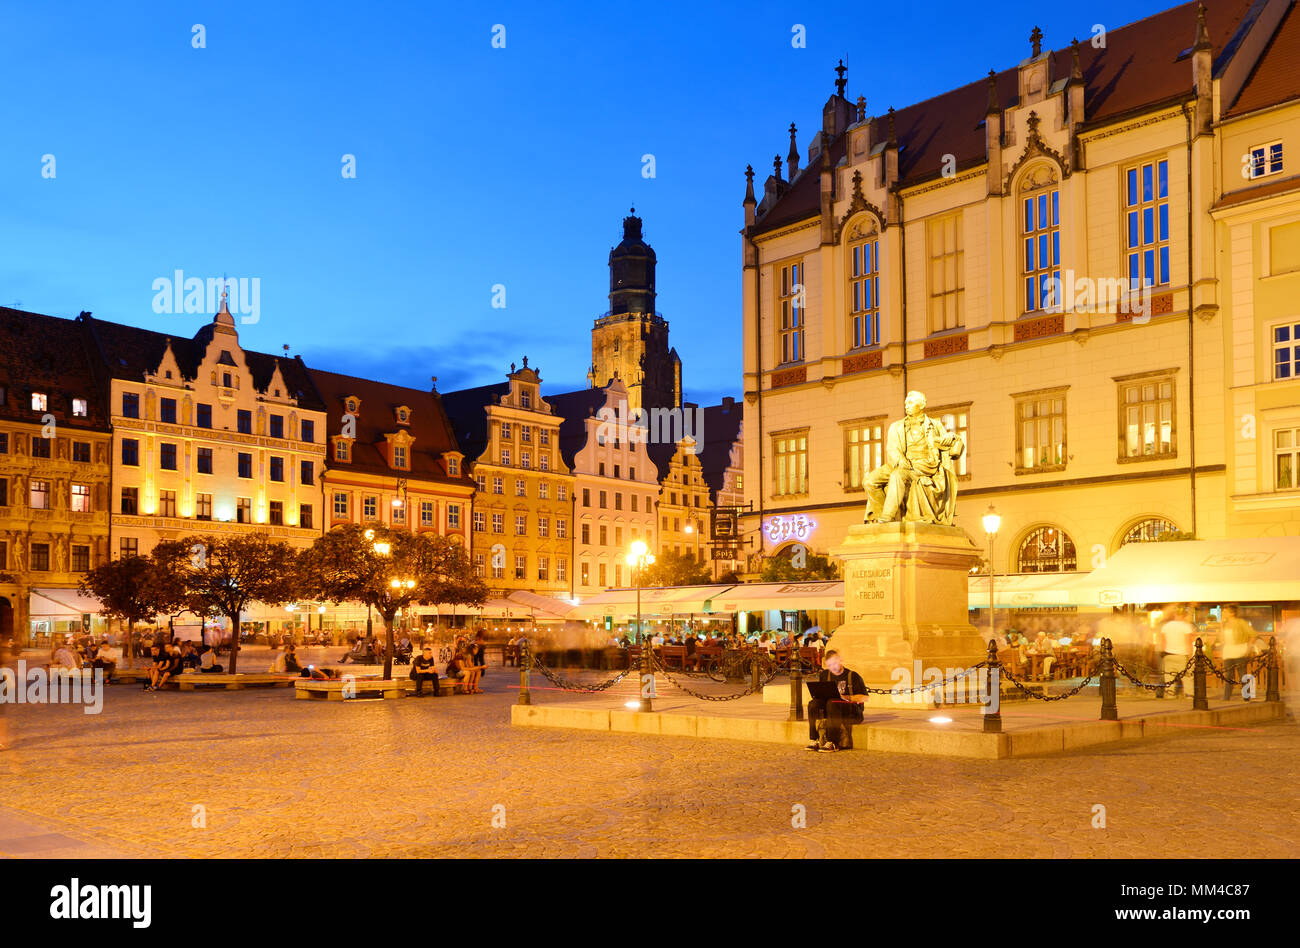 The Rynek (Market Square). This medieval market square is one of the largest in Europe. Wroclaw, Poland Stock Photo